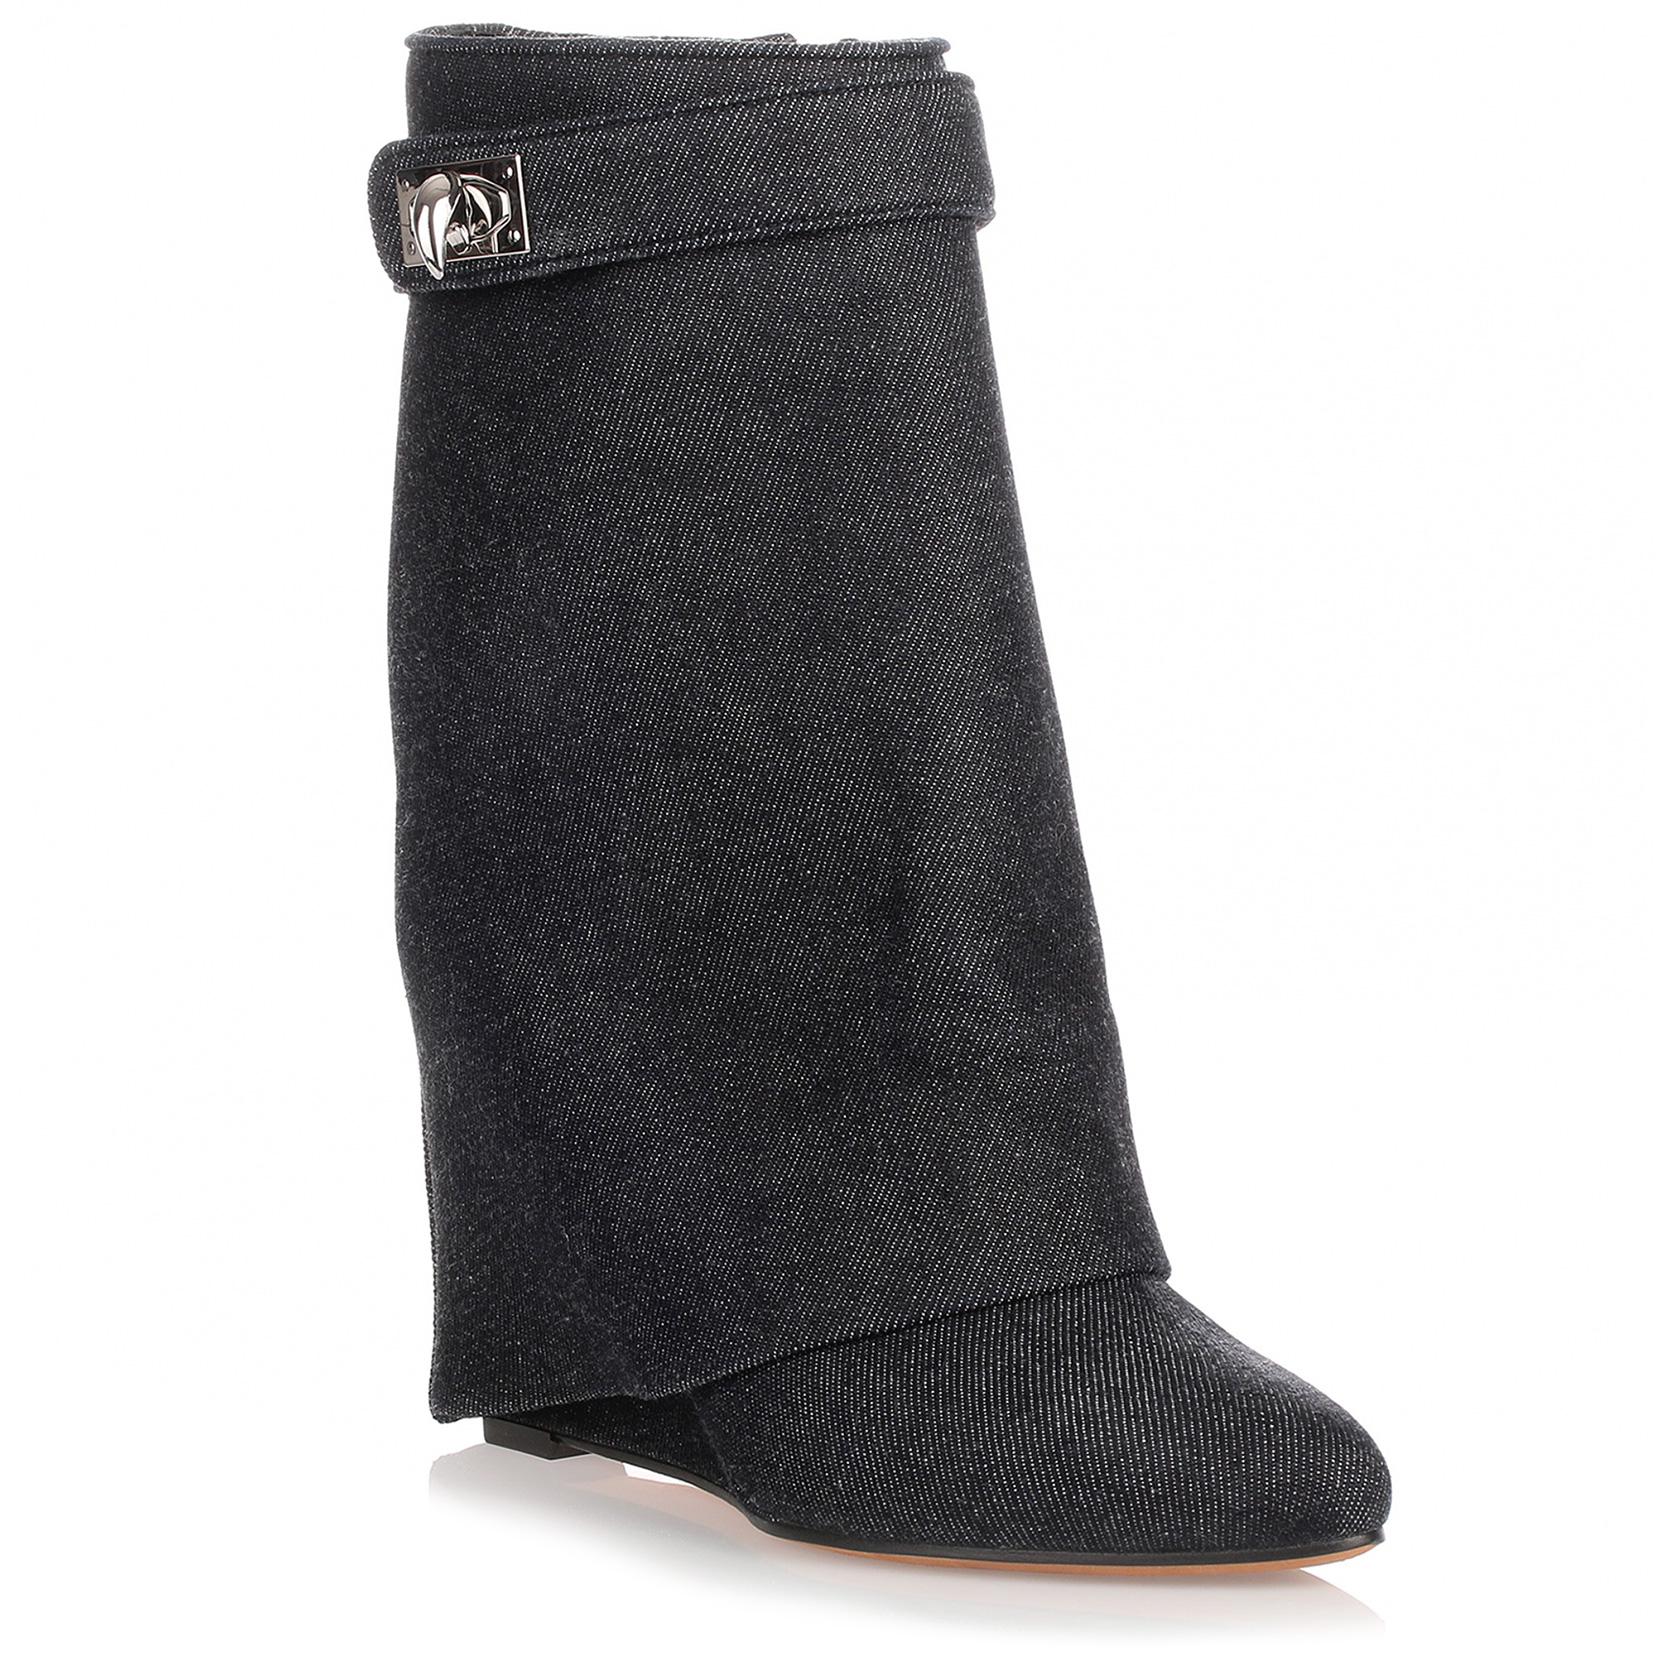 Givenchy Fold-over Denim Shark Lock Ankle Boots in Black - Lyst